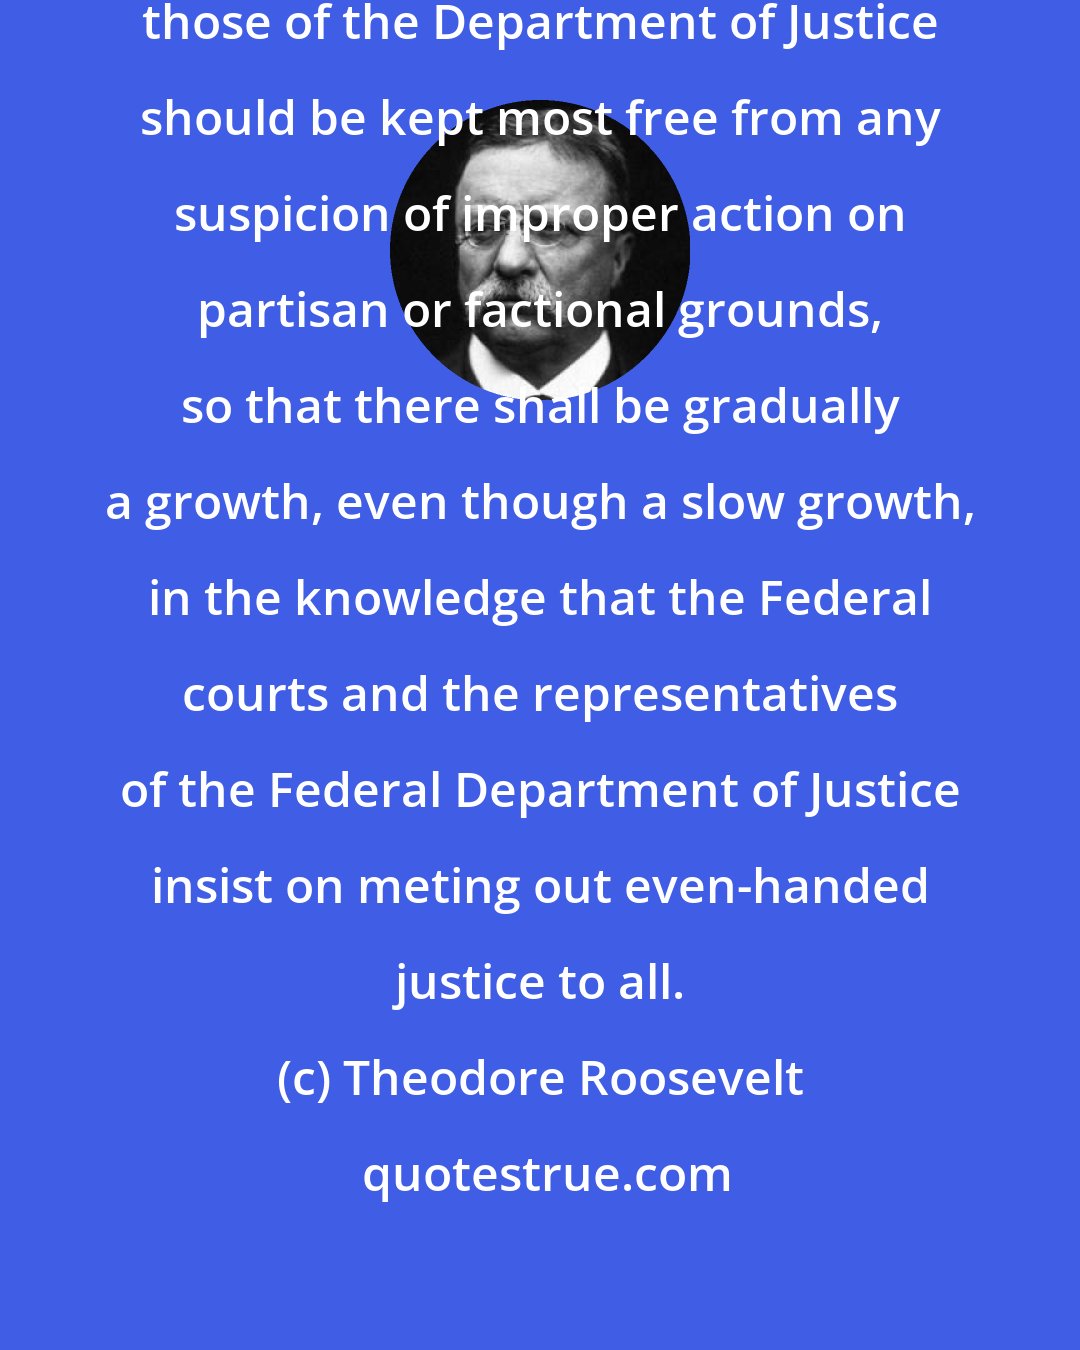 Theodore Roosevelt: Of all the officers of the Government, those of the Department of Justice should be kept most free from any suspicion of improper action on partisan or factional grounds, so that there shall be gradually a growth, even though a slow growth, in the knowledge that the Federal courts and the representatives of the Federal Department of Justice insist on meting out even-handed justice to all.